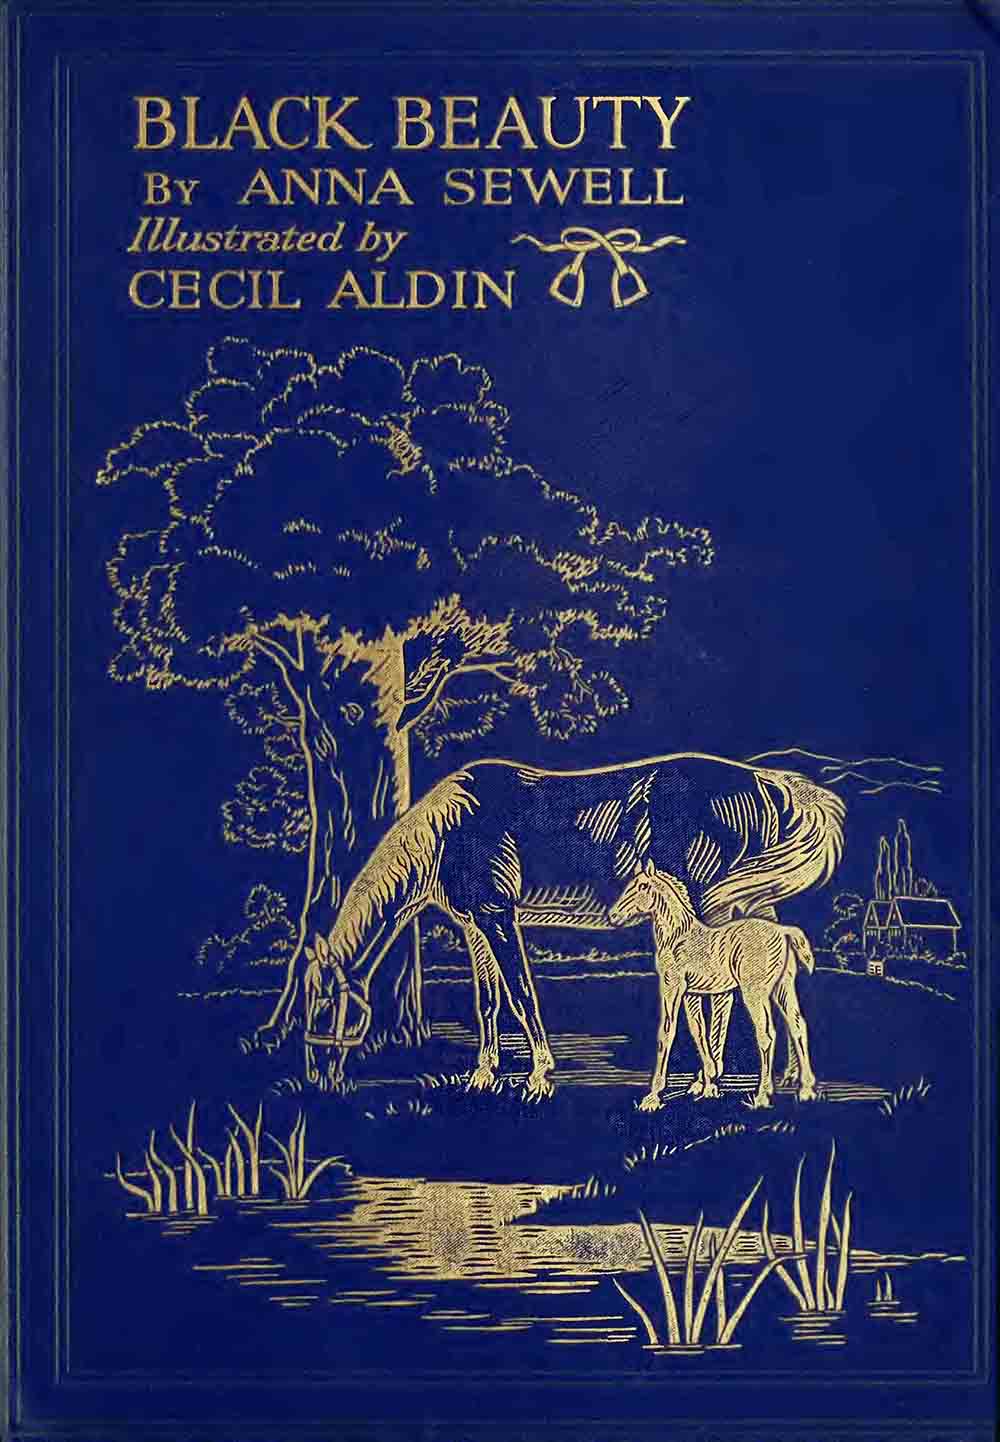 Black Beauty Book Cover 1916 Anna Sewell